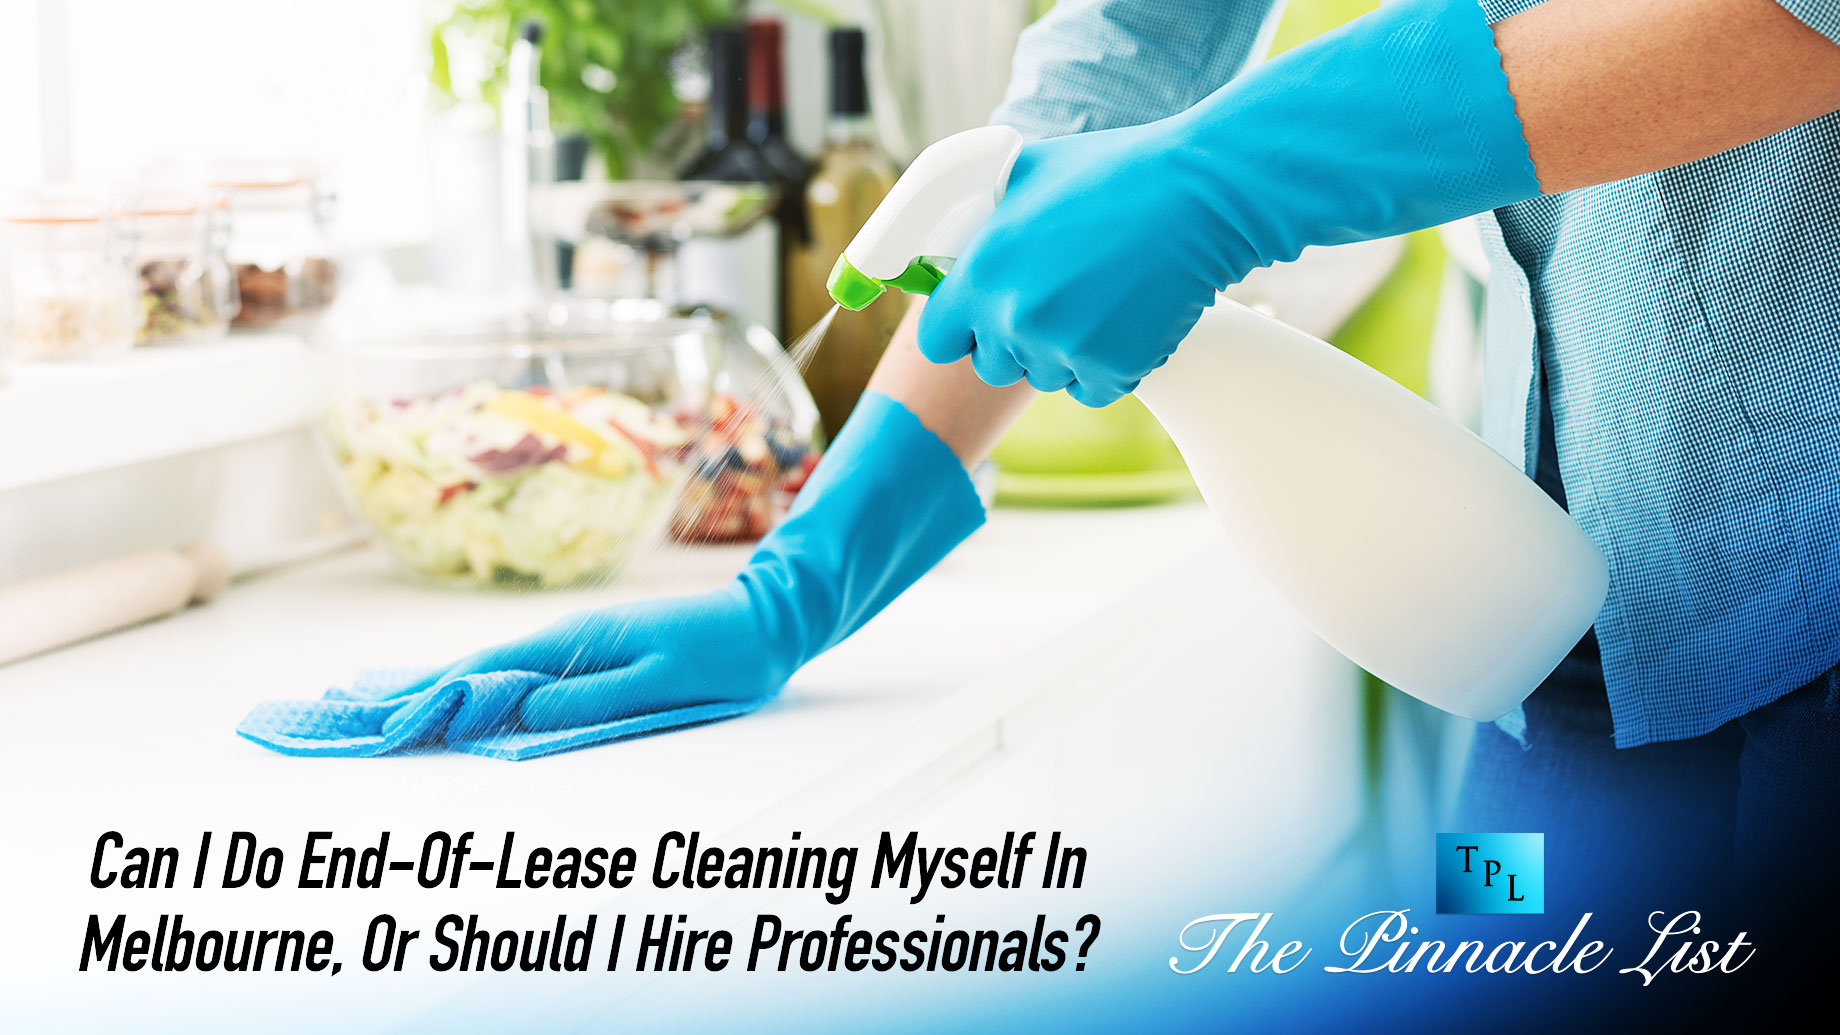 Can I Do End-Of-Lease Cleaning Myself In Melbourne, Or Should I Hire Professionals?